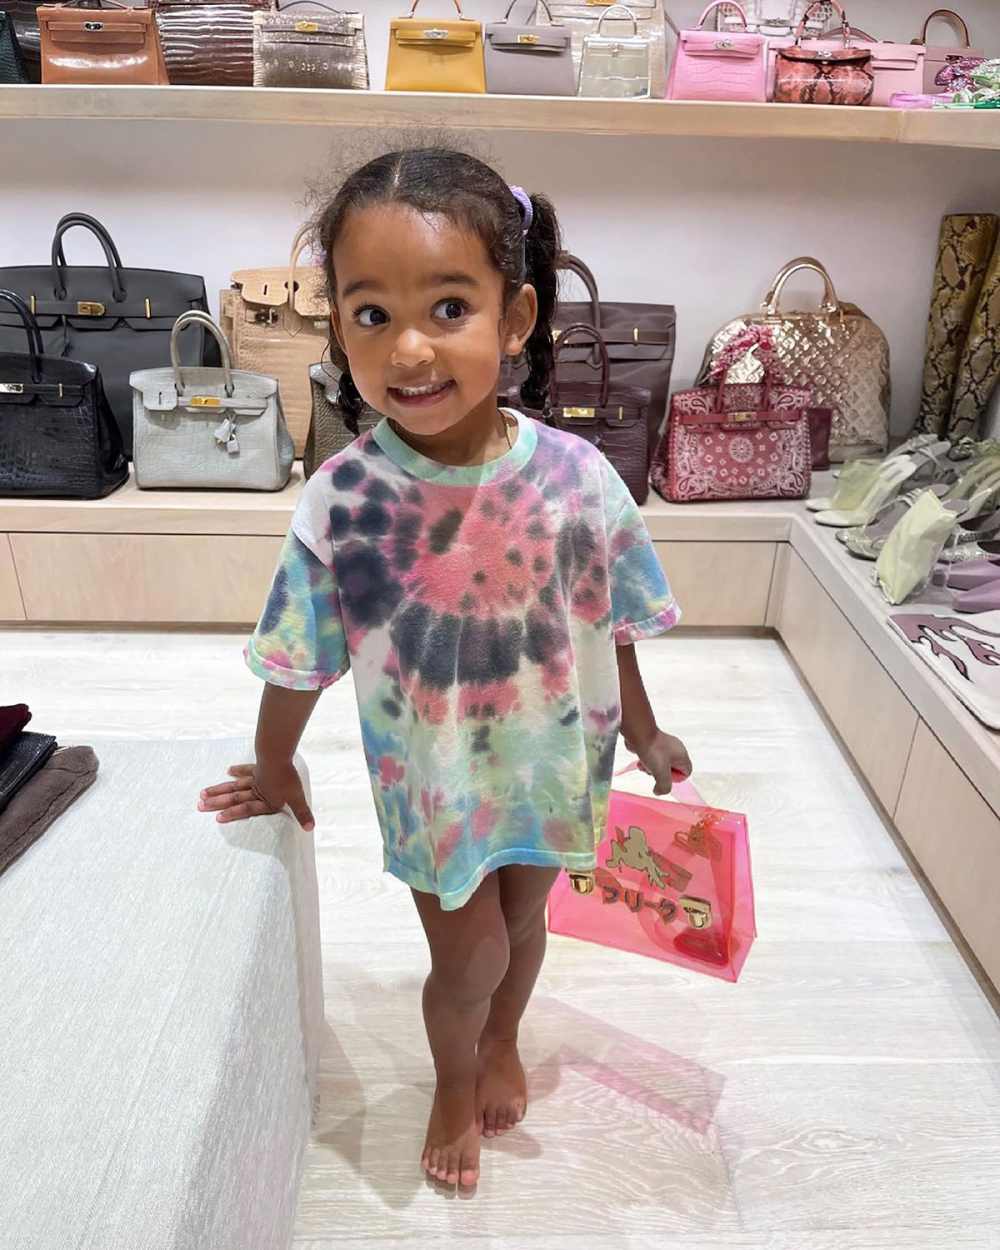 Kim Kardashian catches Chicago West trying to steal her purse